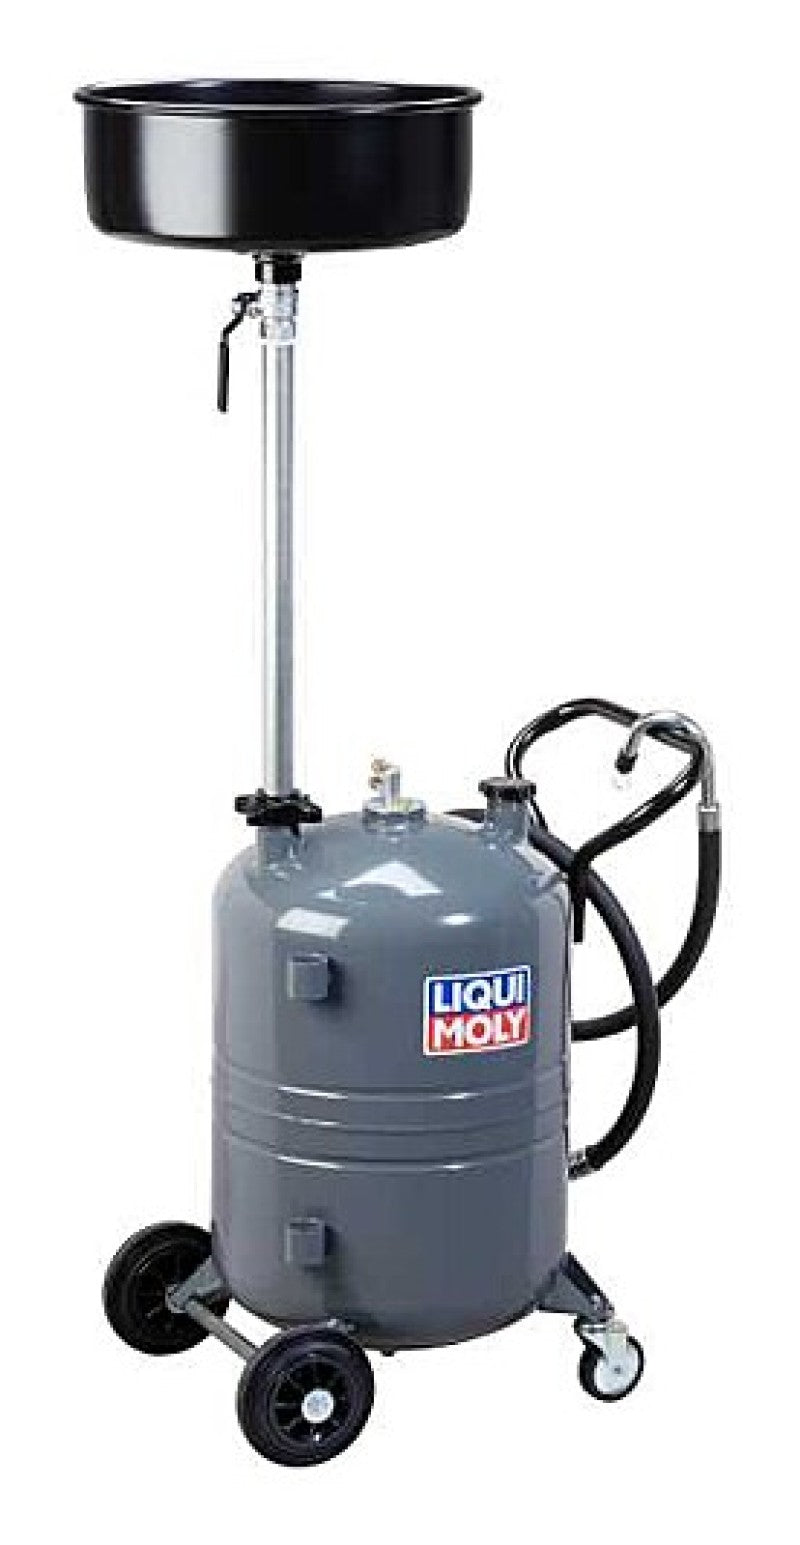 LIQUI MOLY Waste Oil Collecting Tank.